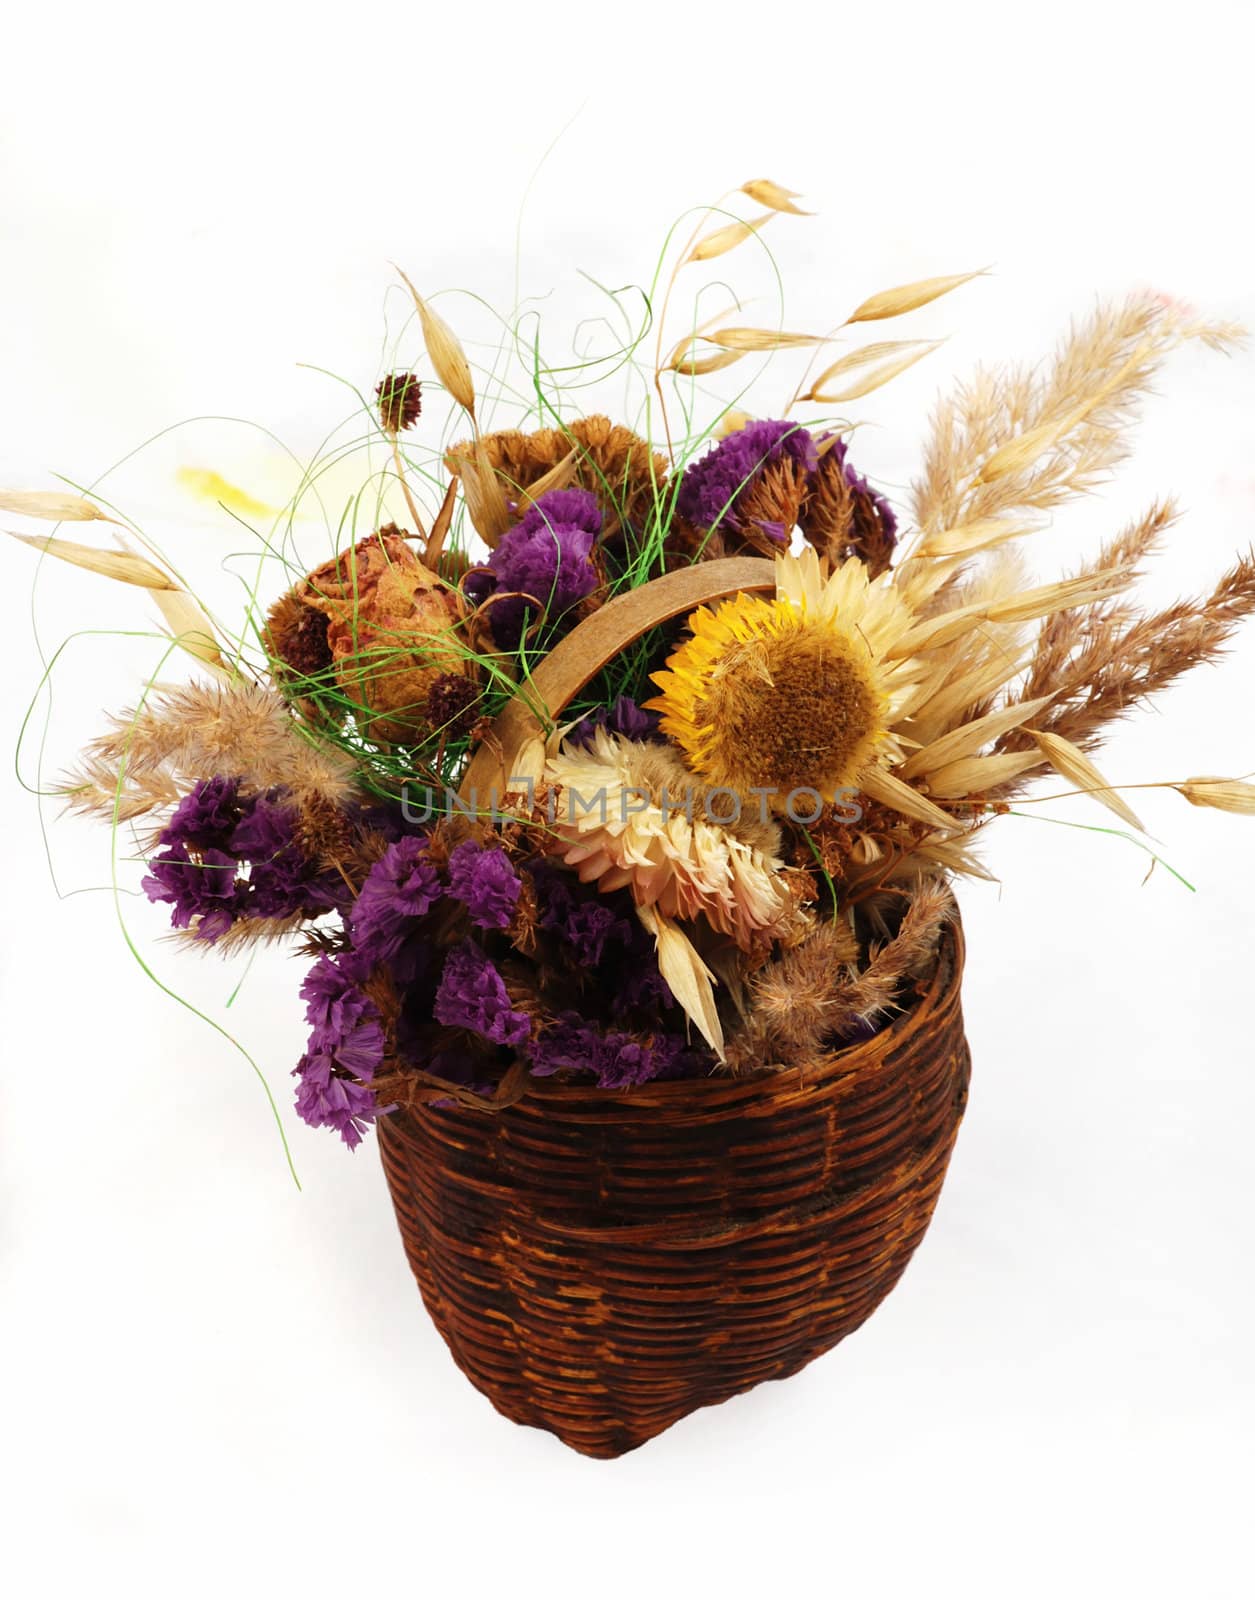 Dry fowers in the basket by fyletto